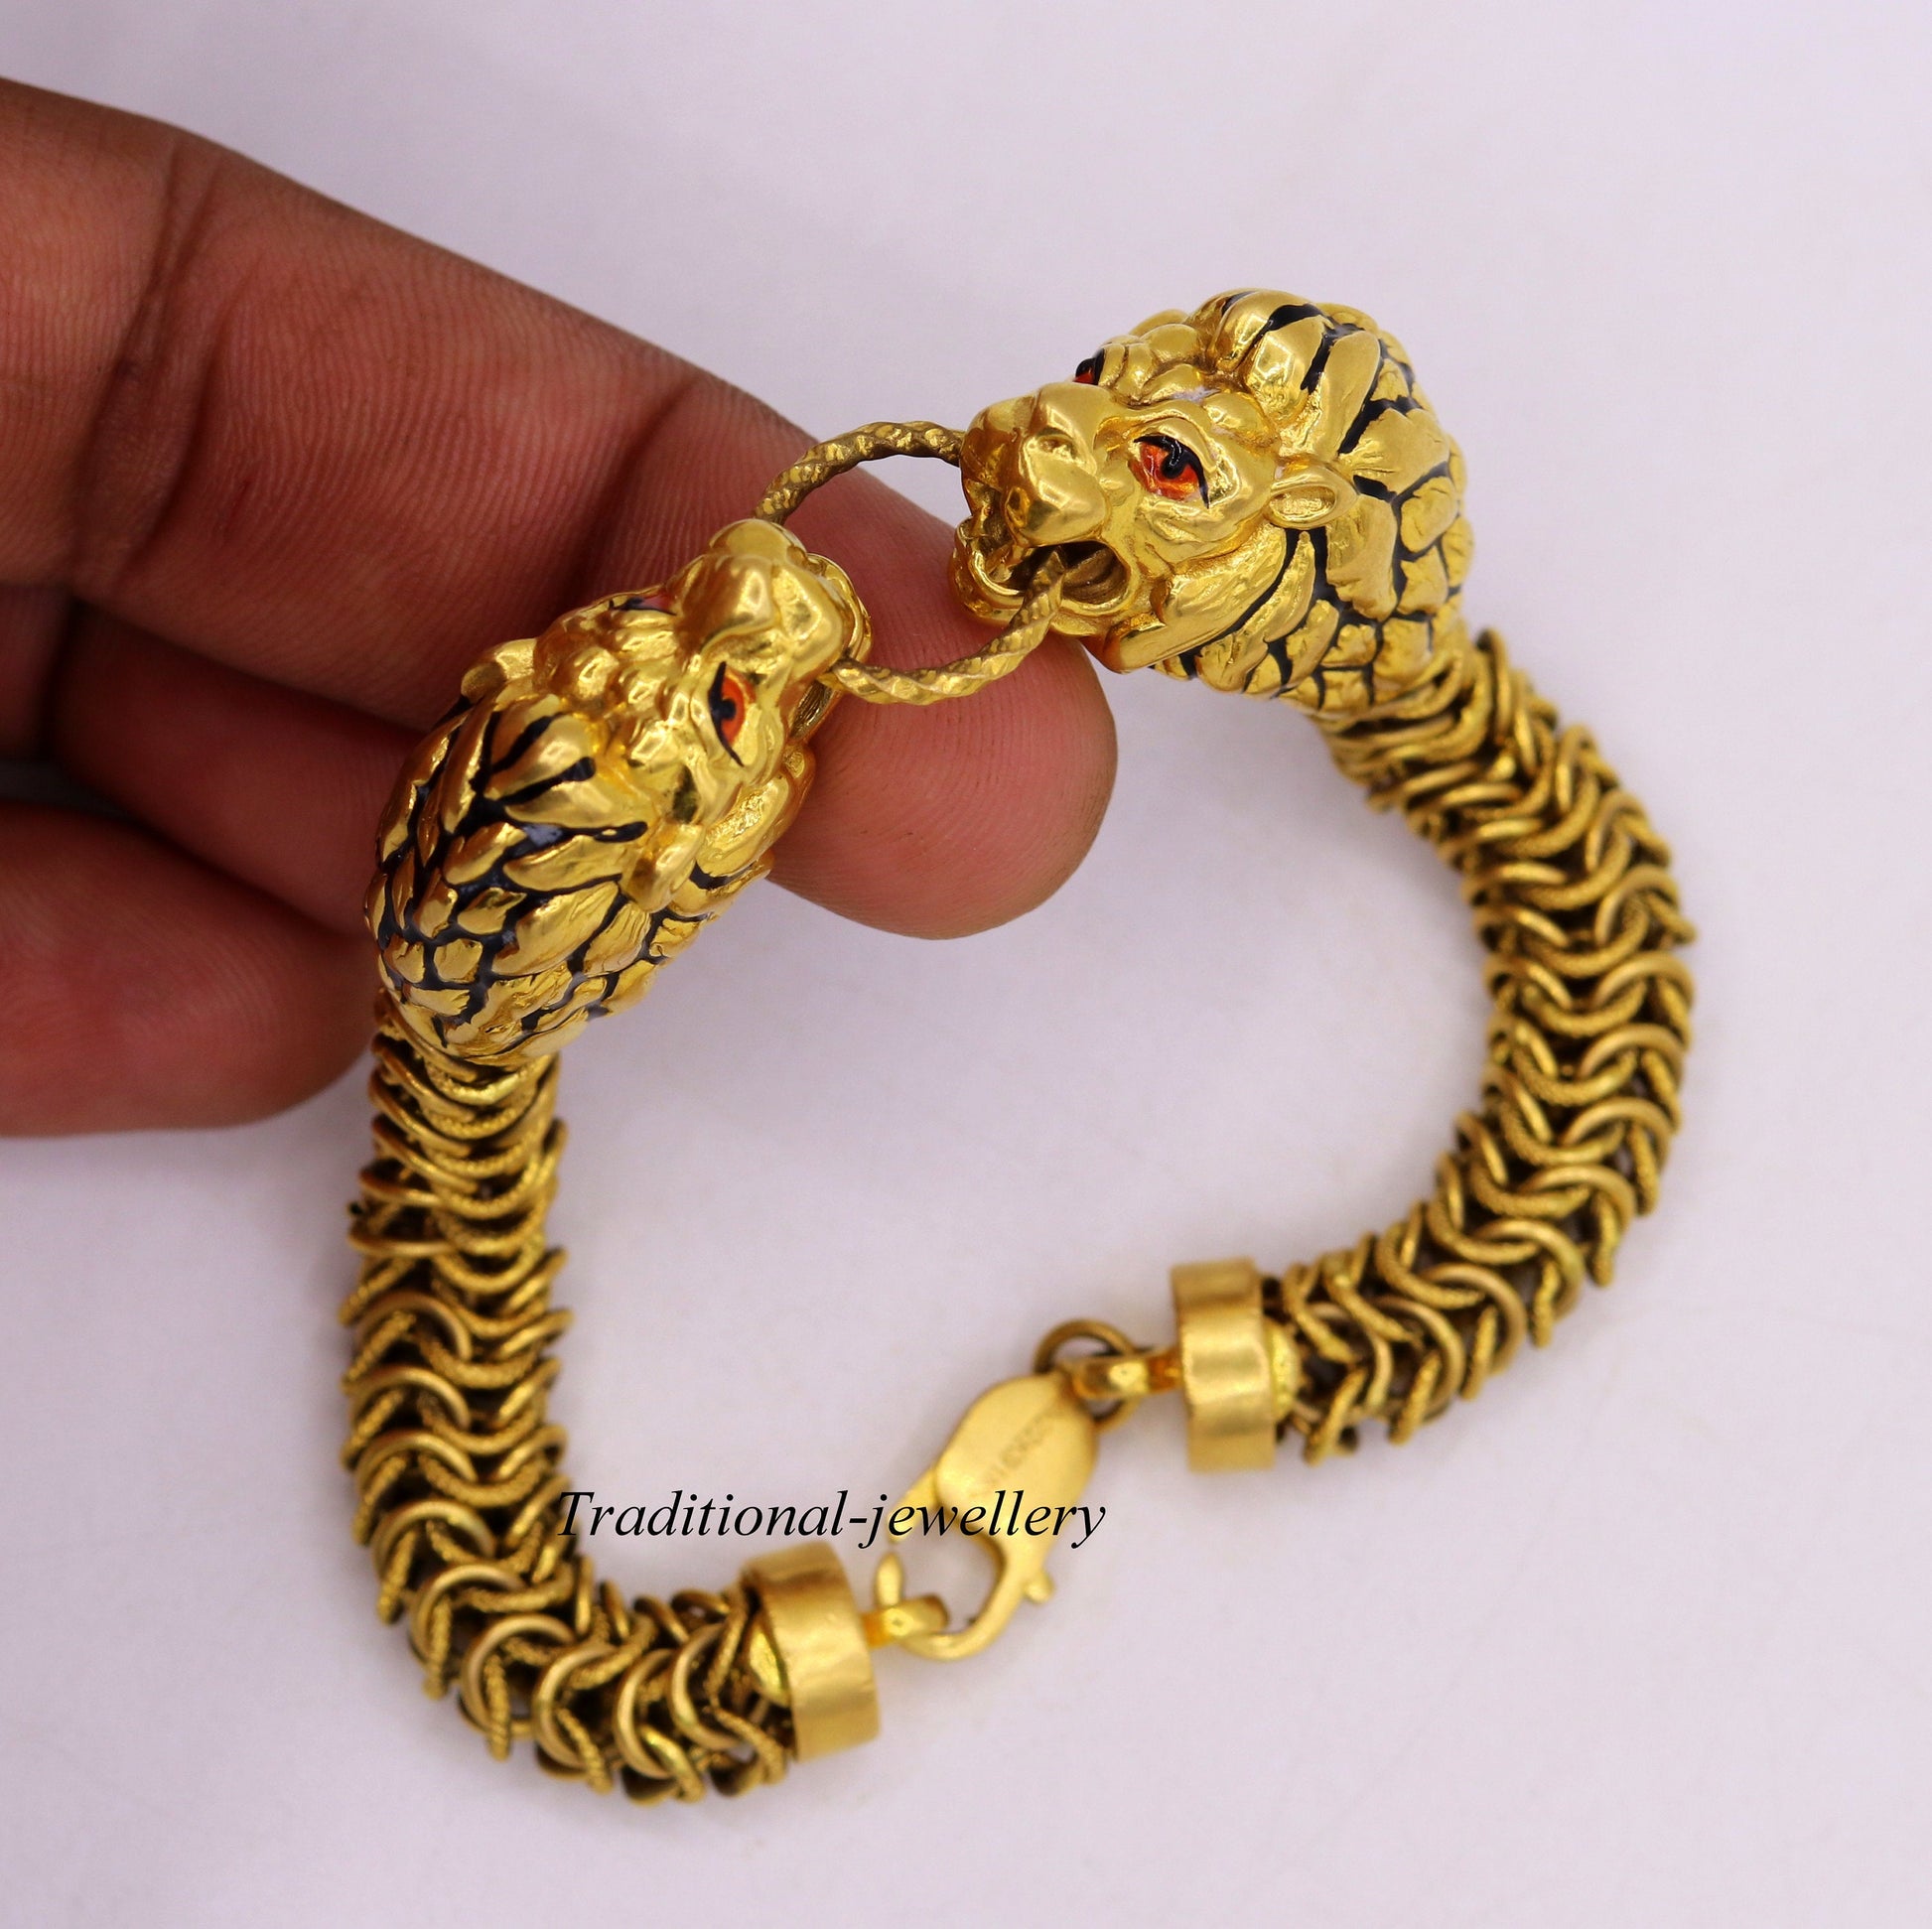 Vintage antique stylish handmade lion bracelet in solid hallmarked 22kt yellow gold men's bracelet lion face daily use jewelry - TRIBAL ORNAMENTS